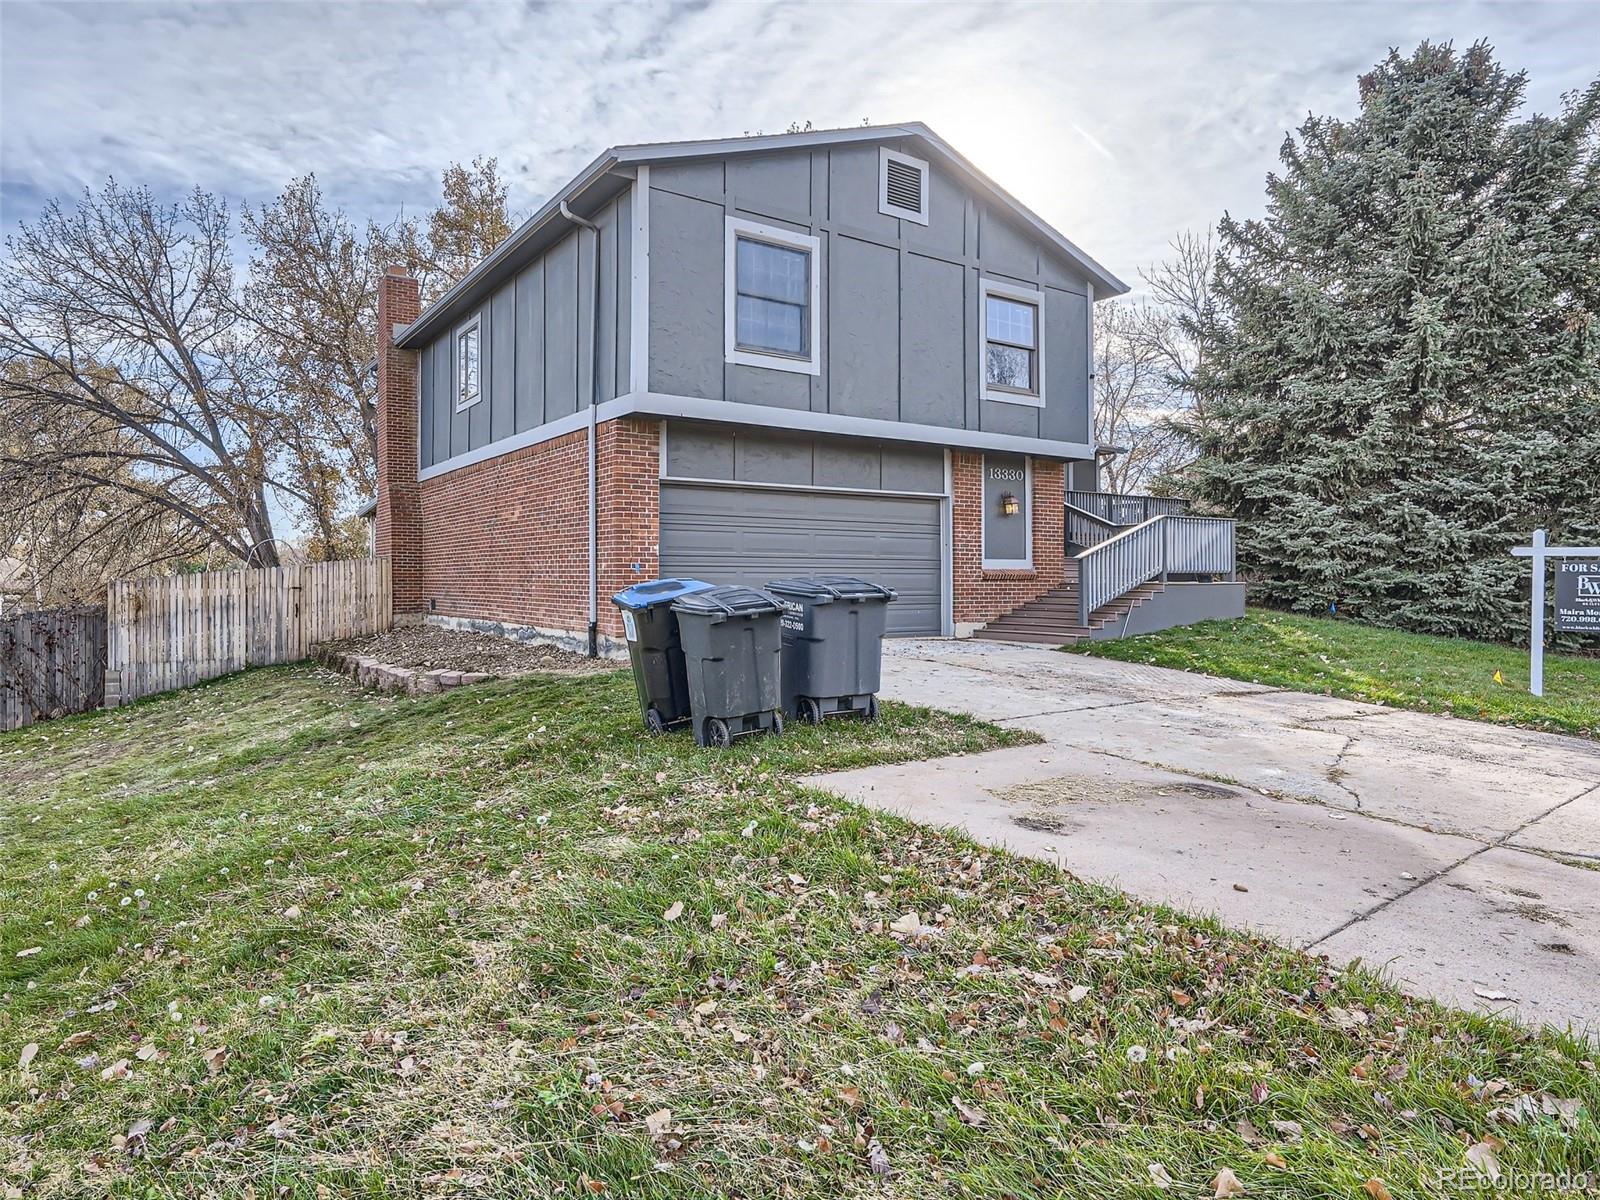 13330 w 72nd circle, arvada sold home. Closed on 2023-12-11 for $608,000.